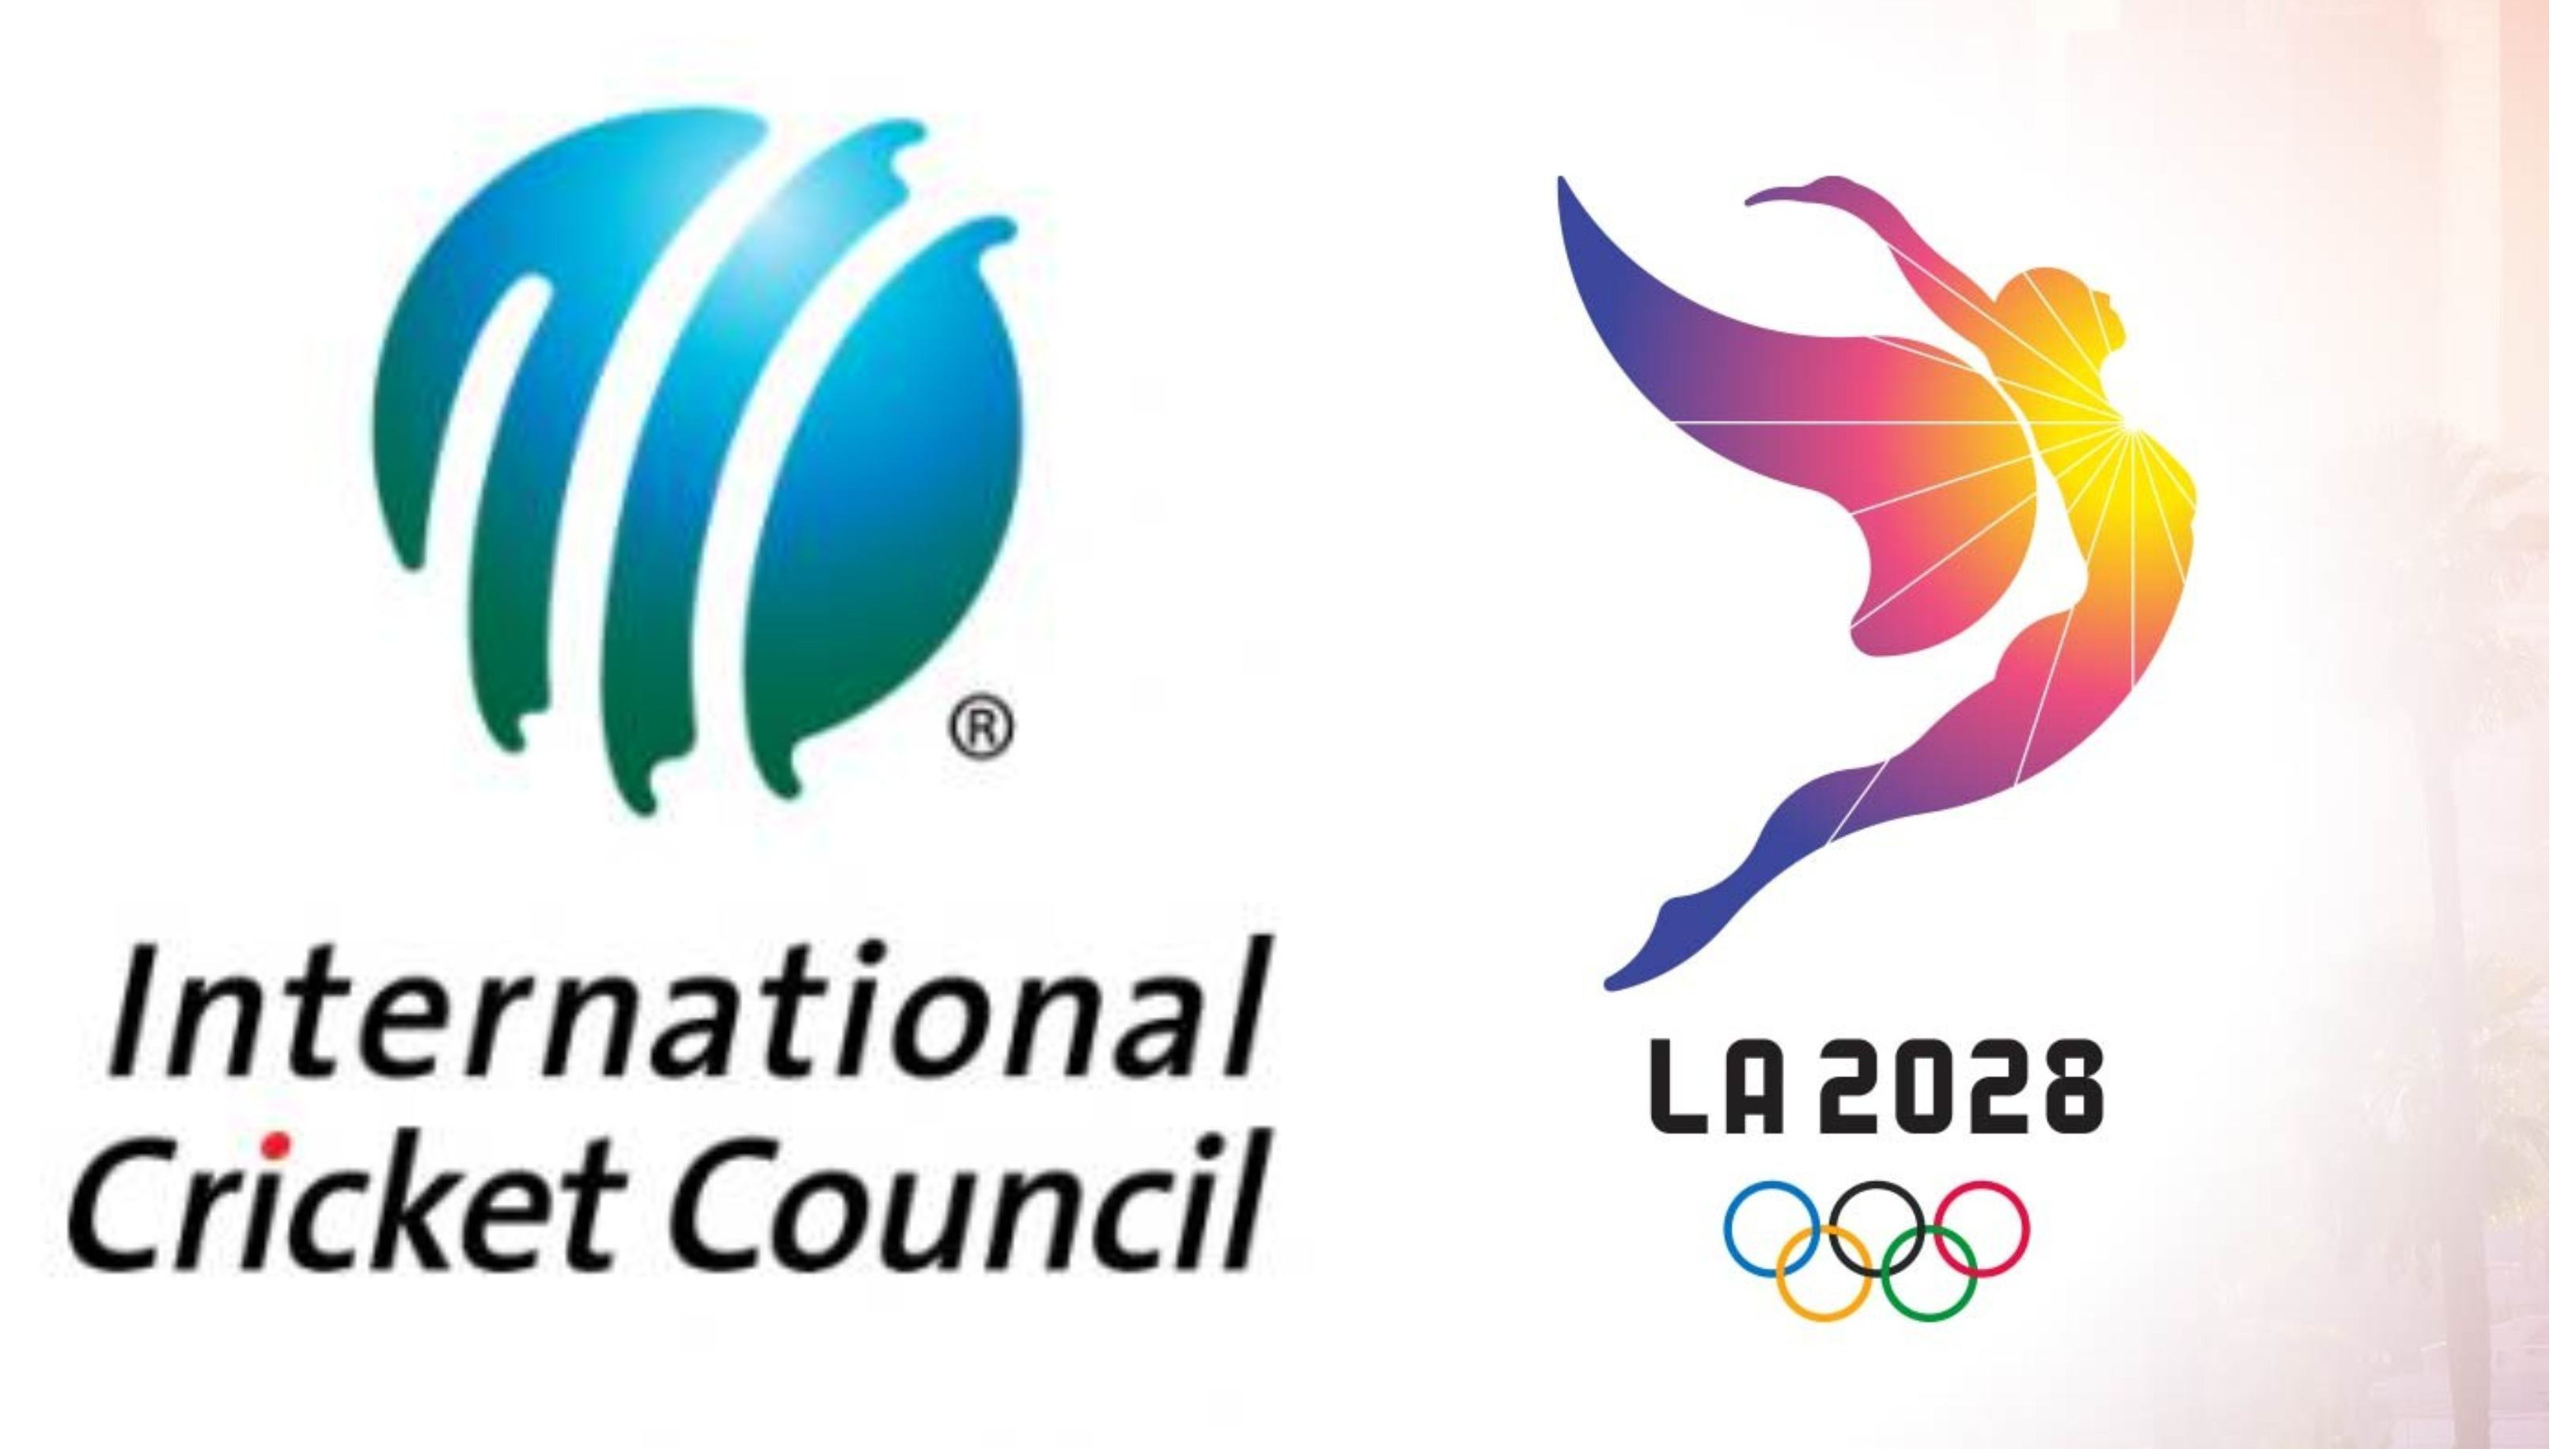 ICC optimistic about cricket’s inclusion in 2028 Olympics as 'additional sport'